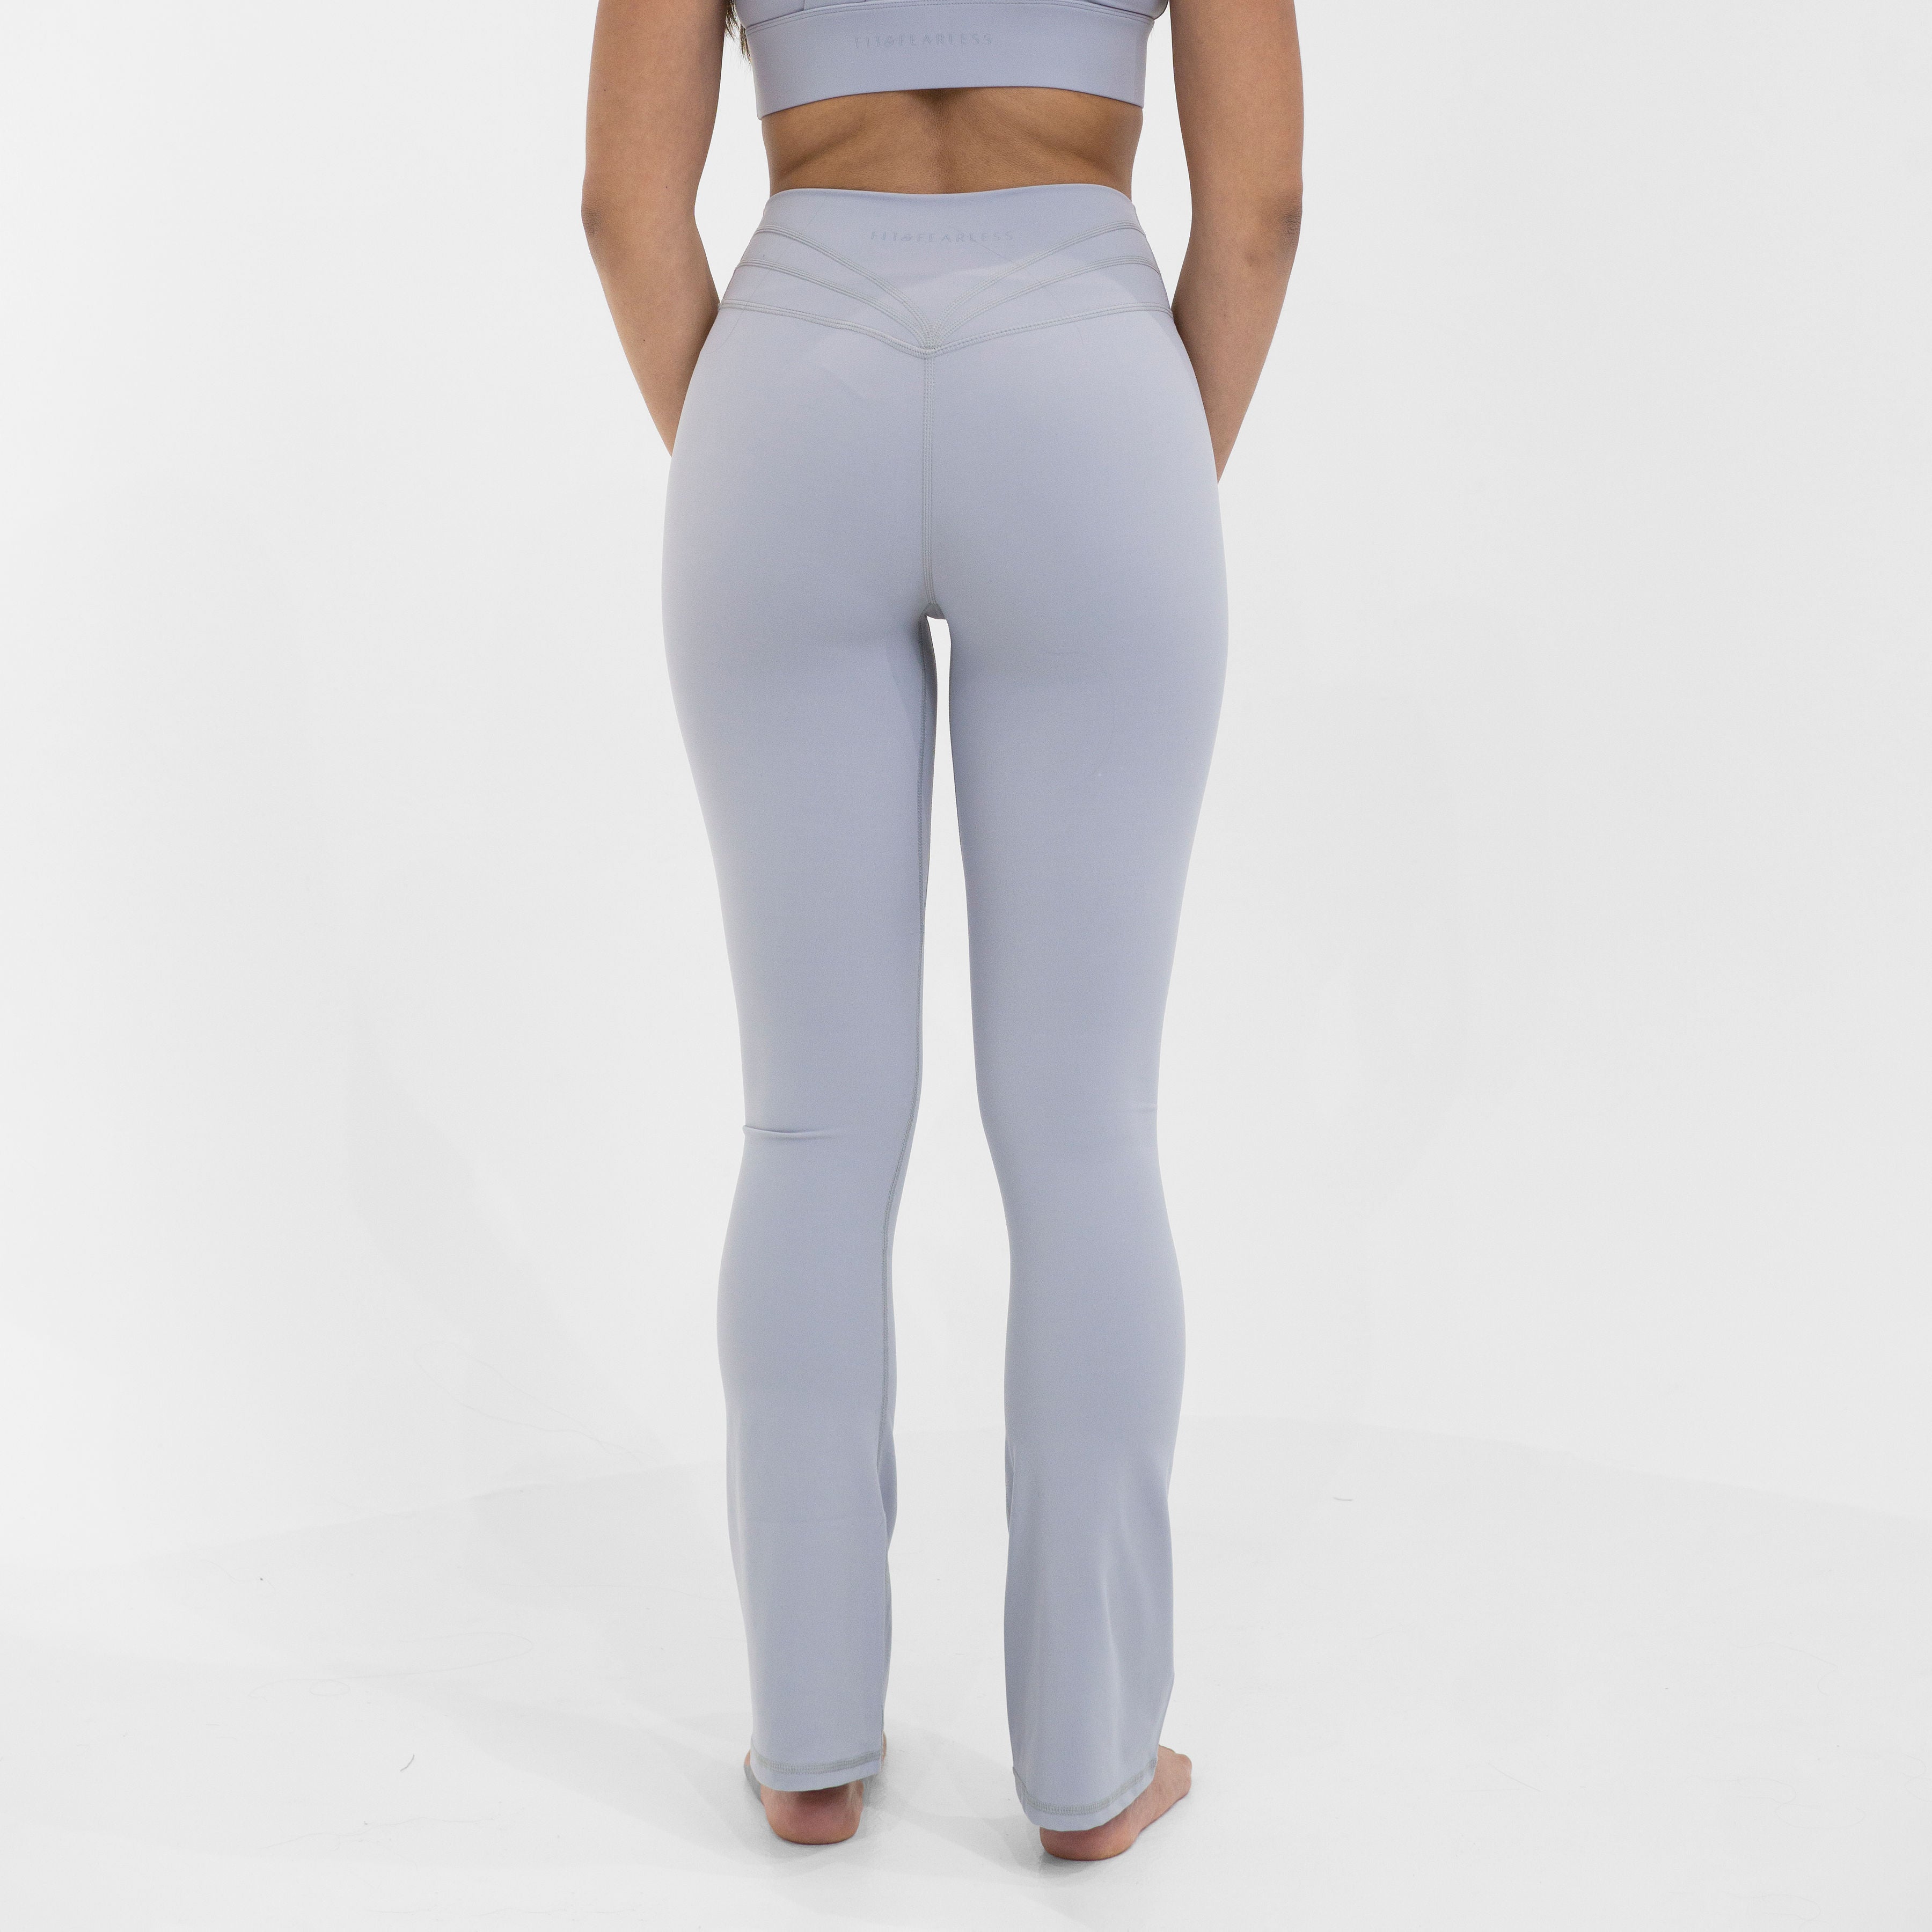 Buy Flare Leggings for Women's for Sale | FIT & FEARLESS